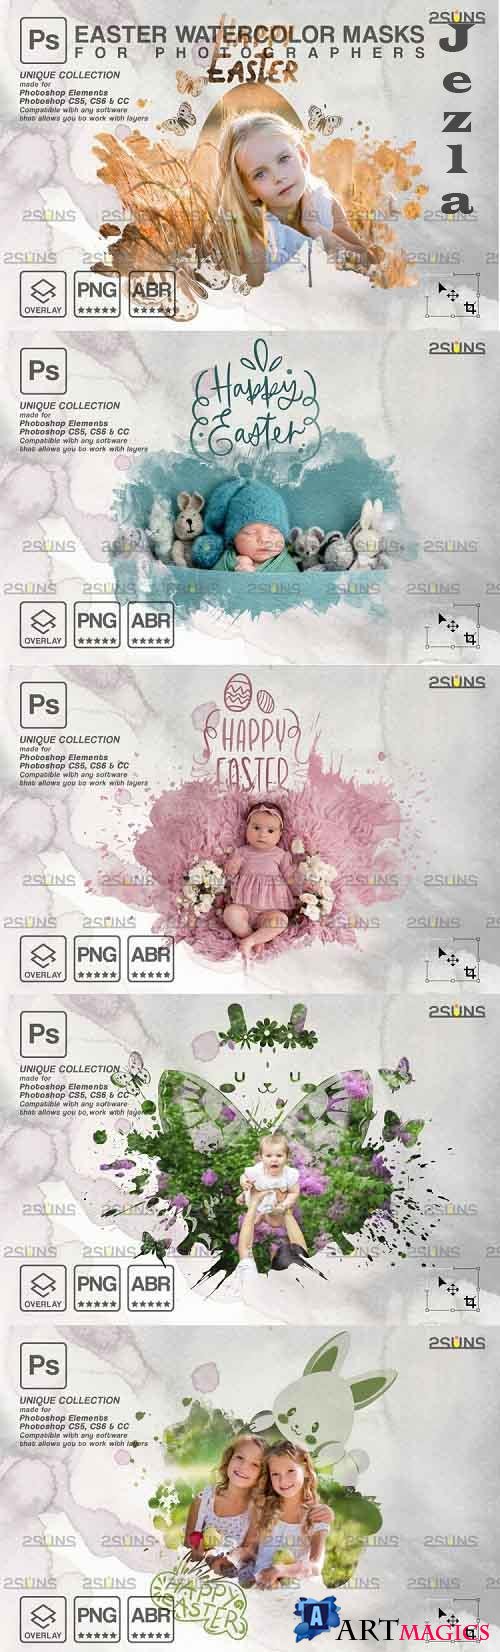 Easter Watercolor overlay & Photoshop overlay V2 - 1224217